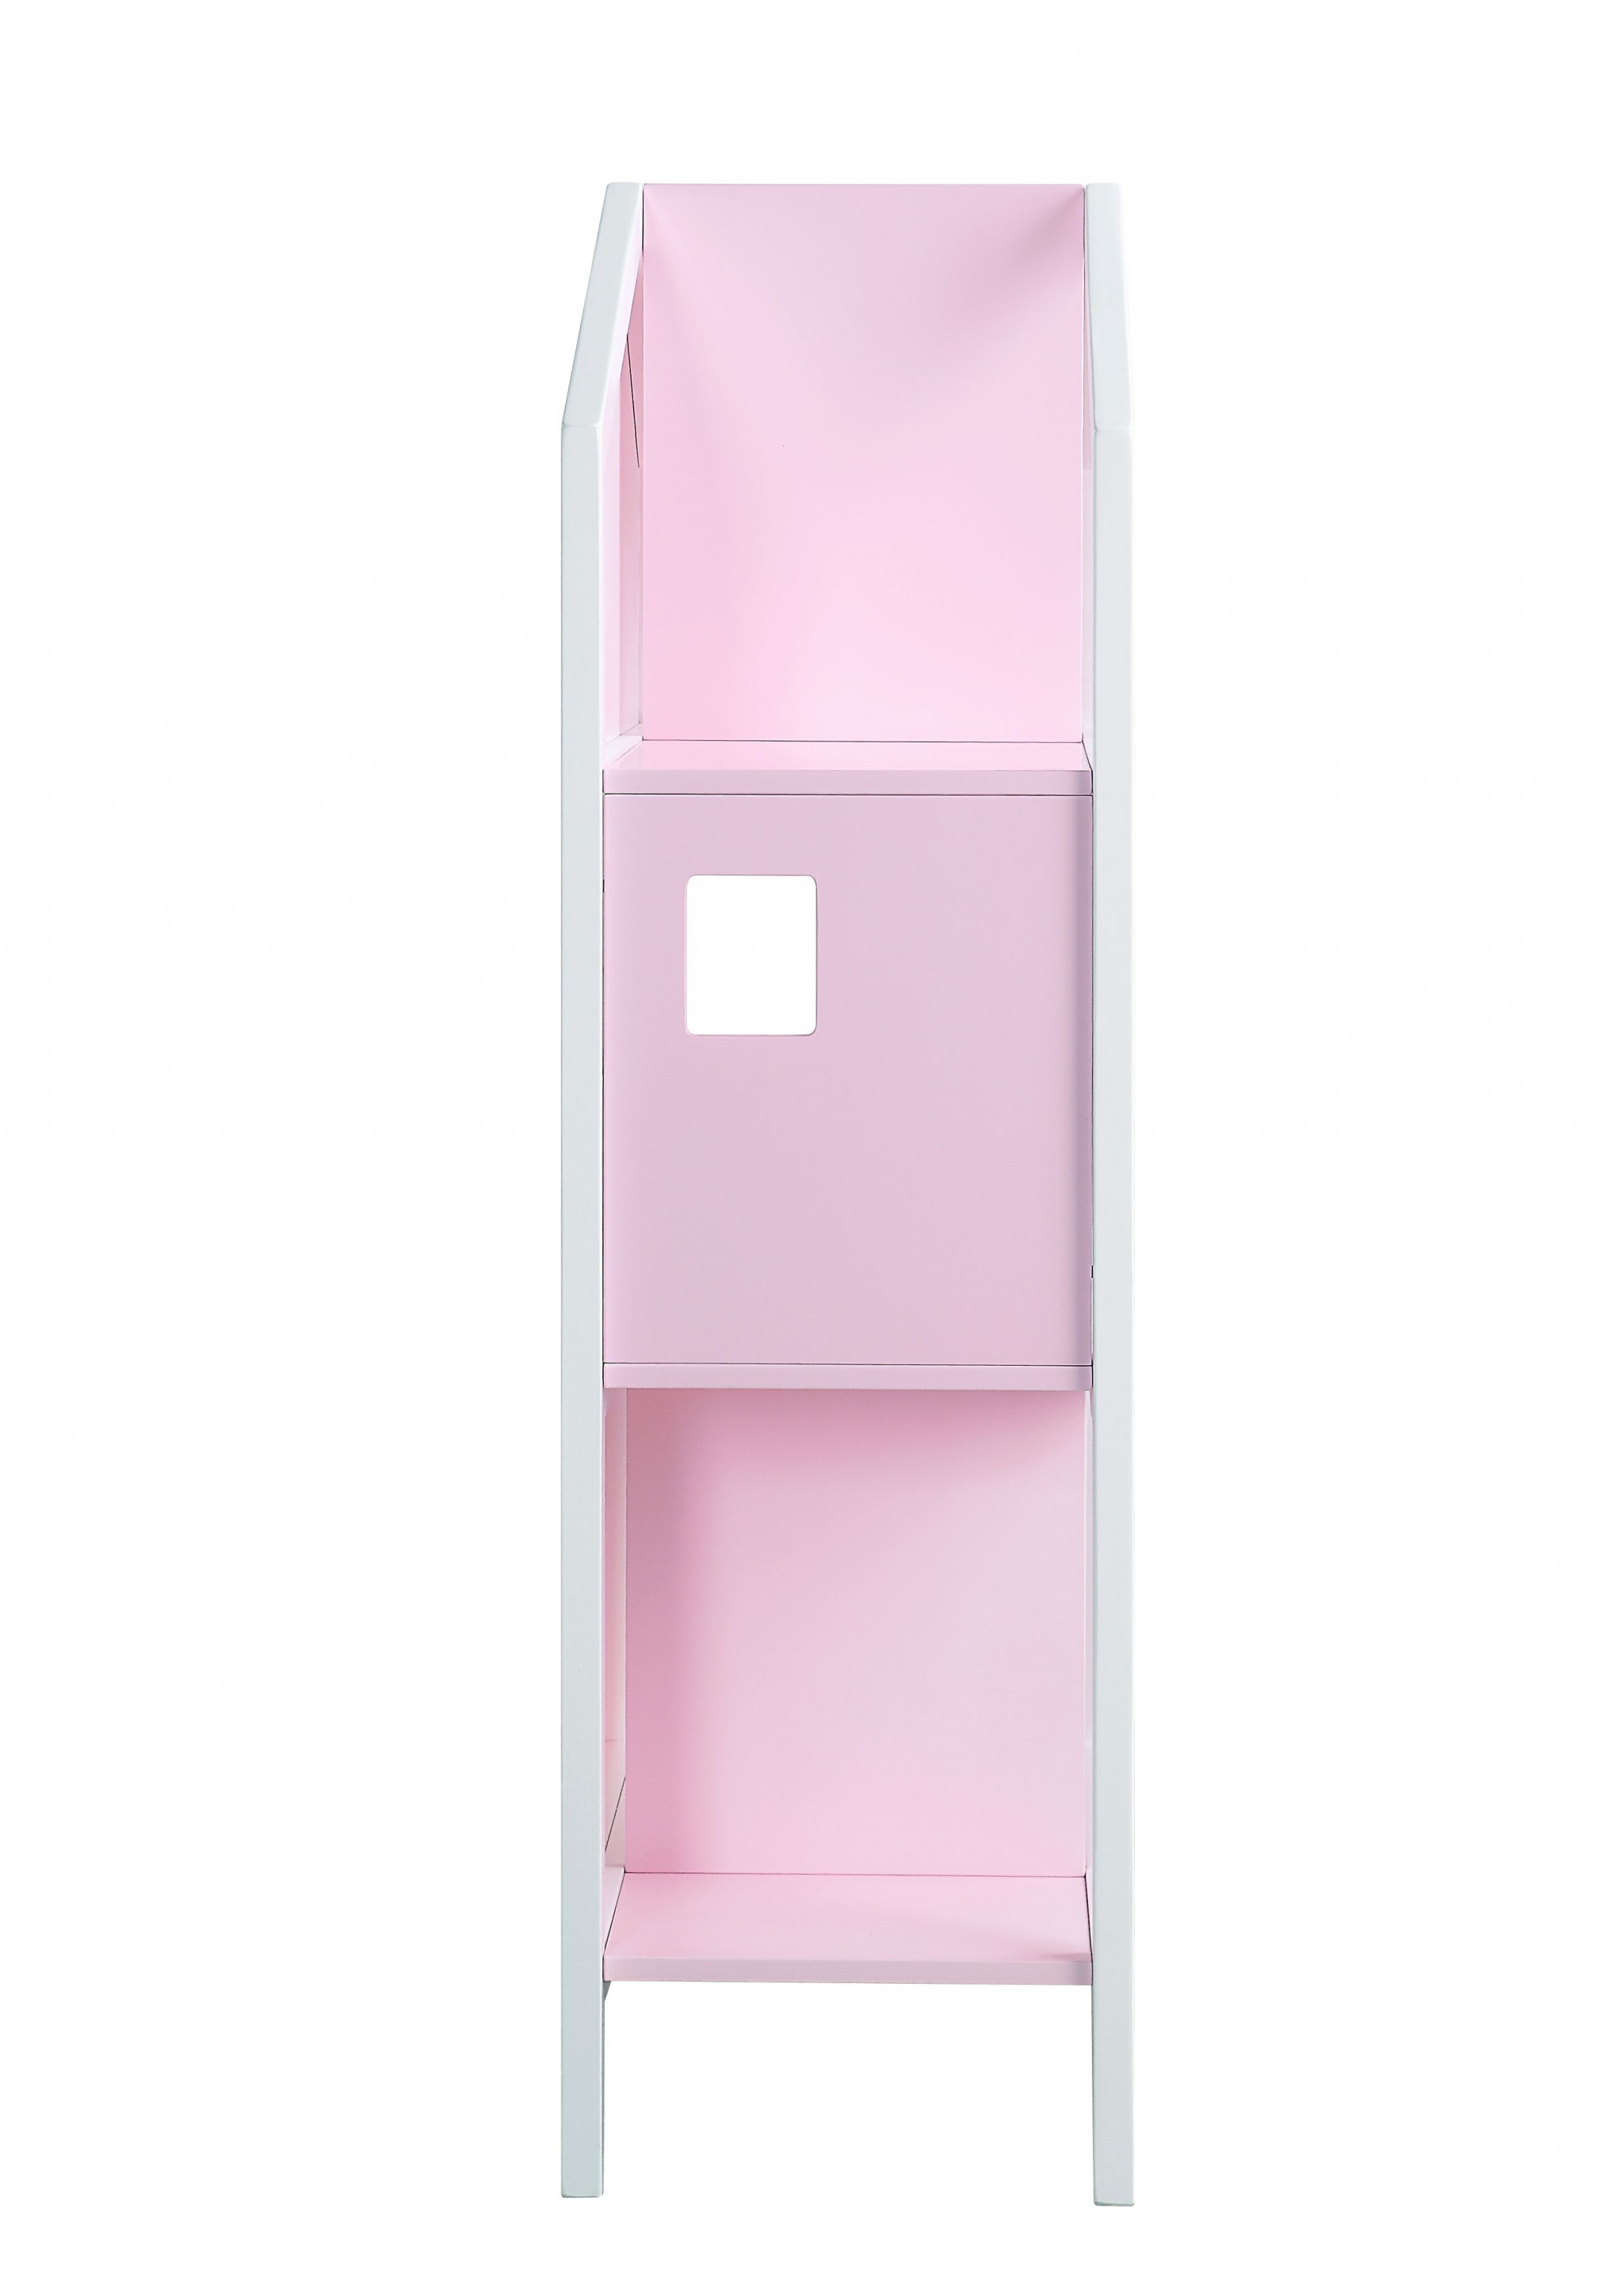 14" X 33" X 50" White Pink Wood Bookcase